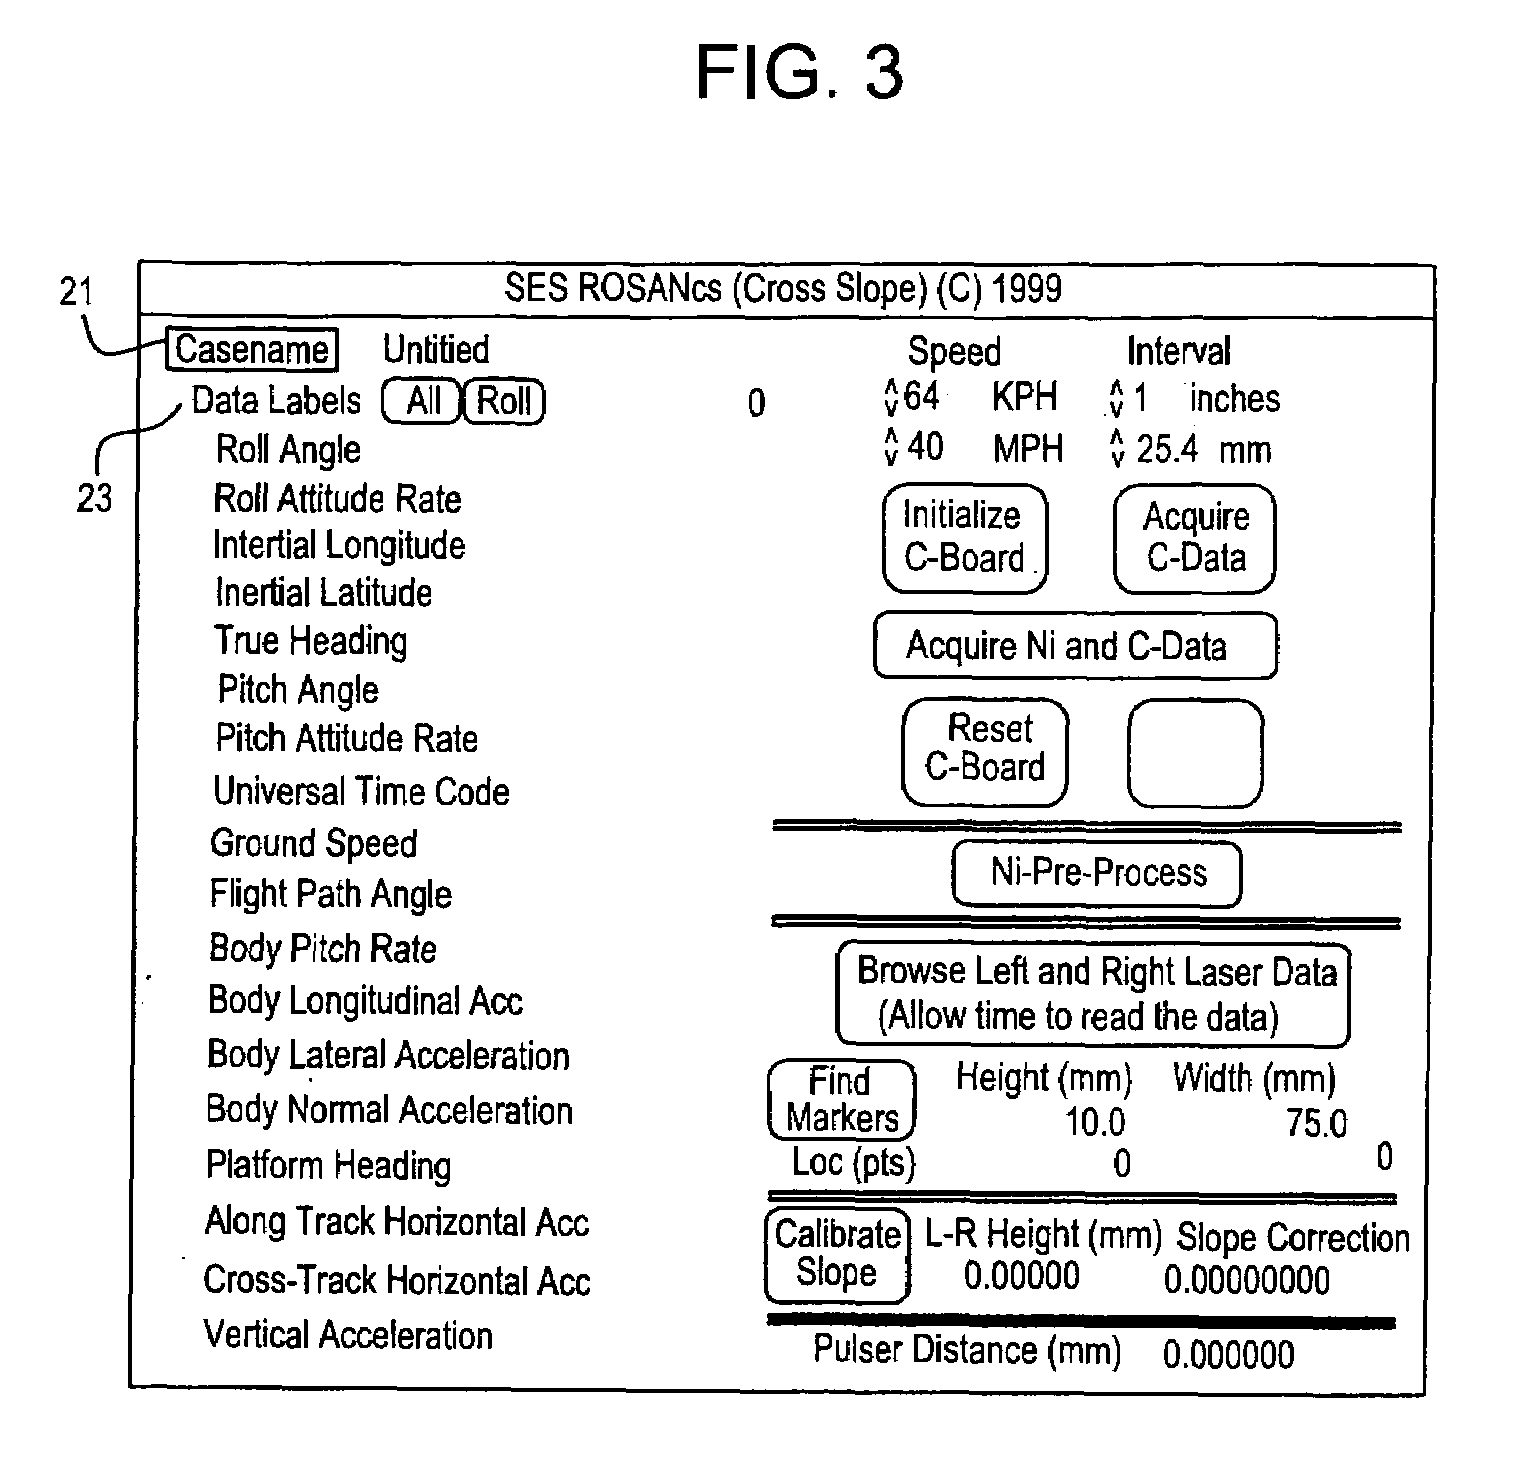 Method and apparatus for pavement cross-slope measurement